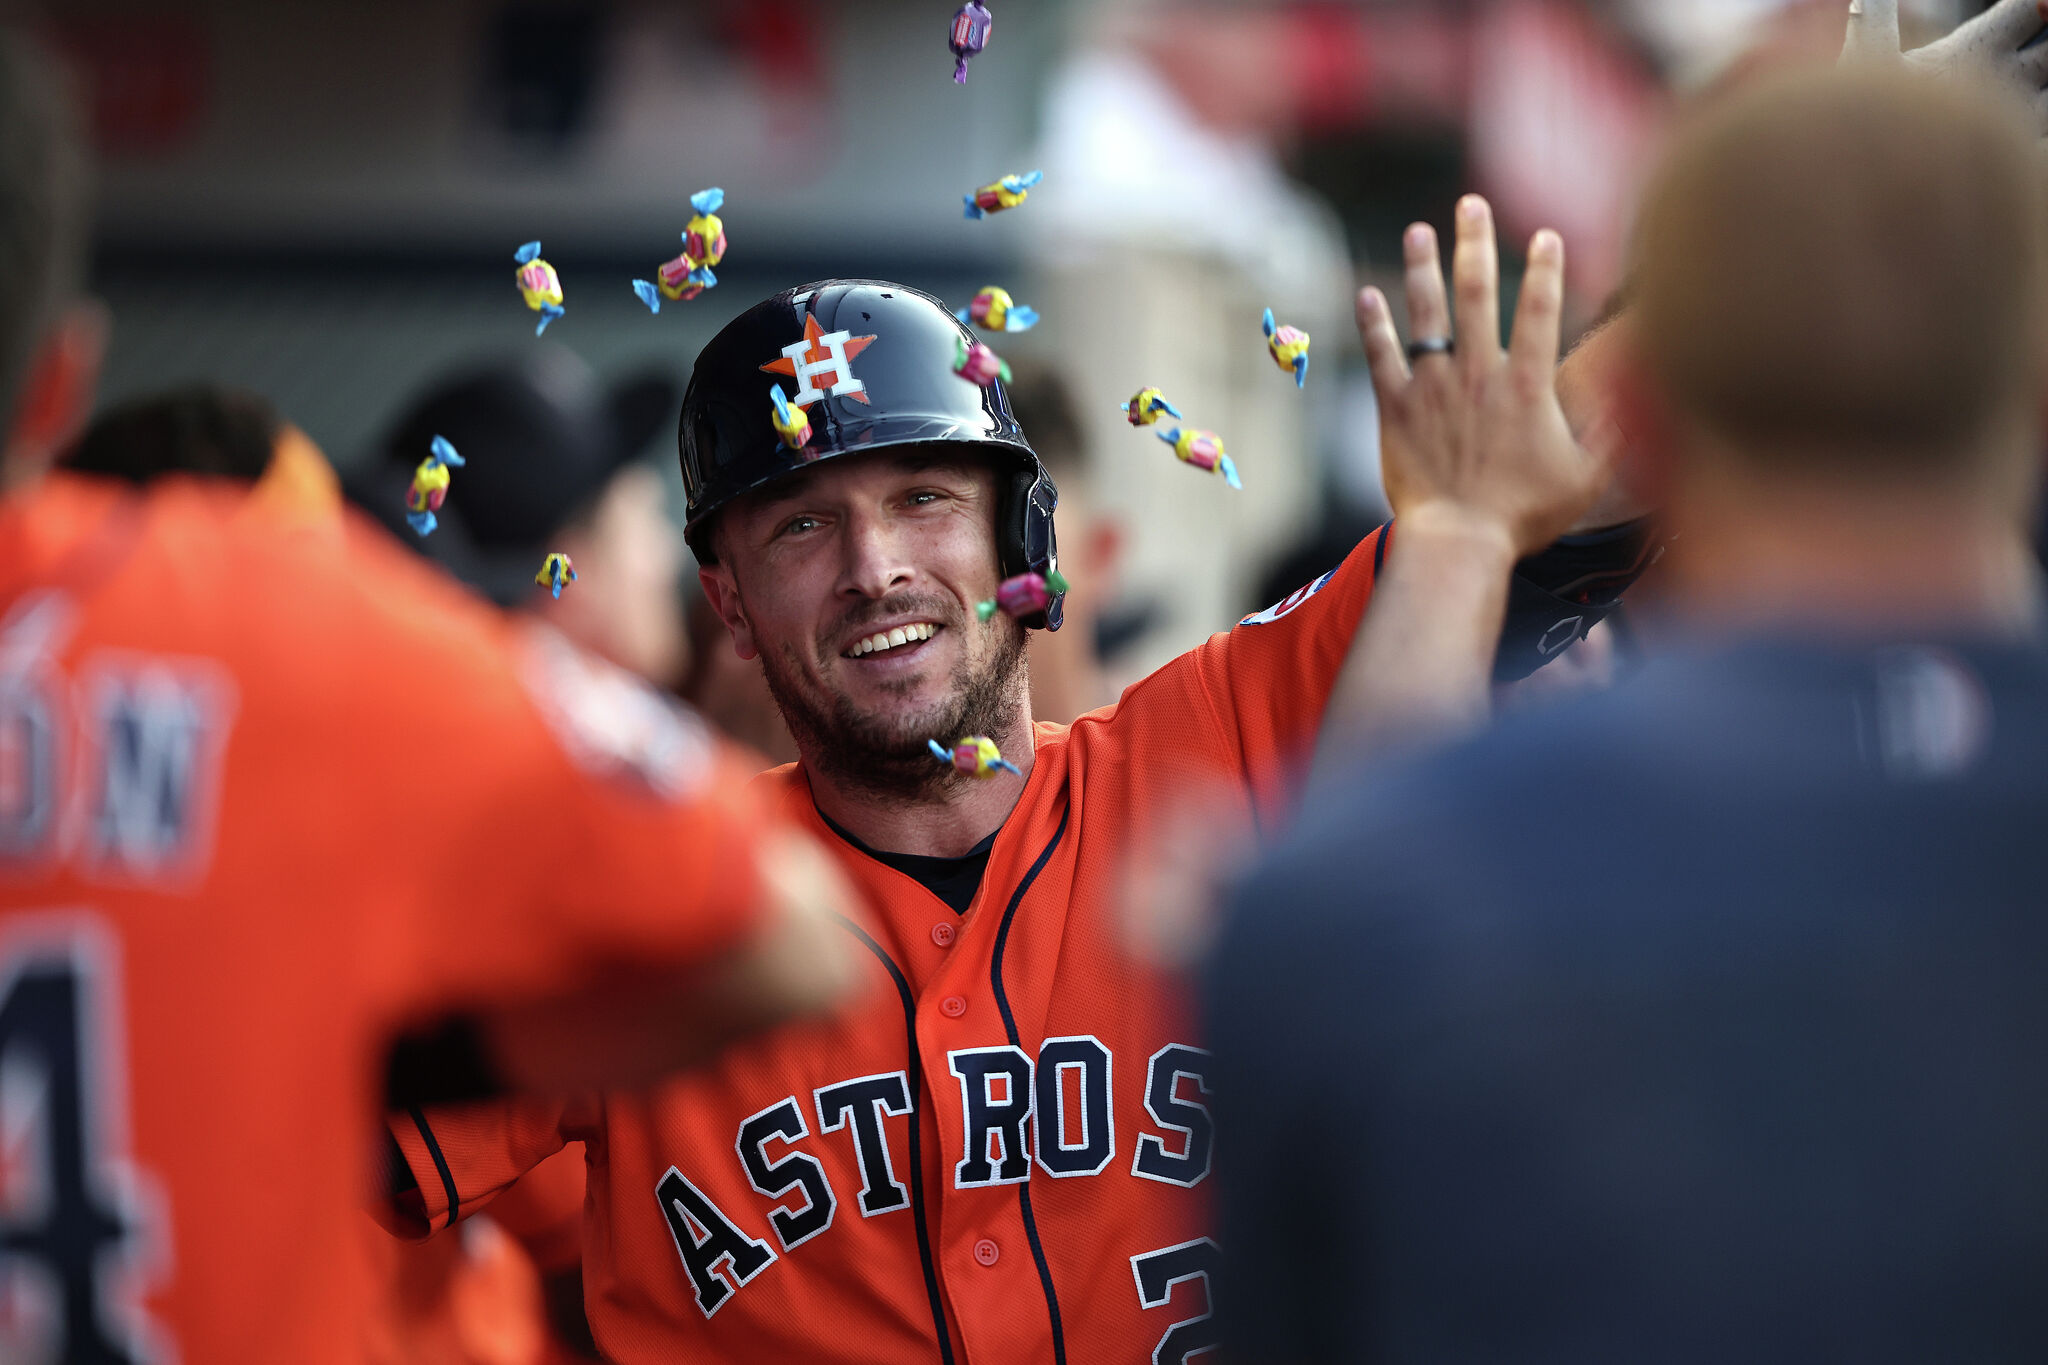 Astros fans are eating up winning season